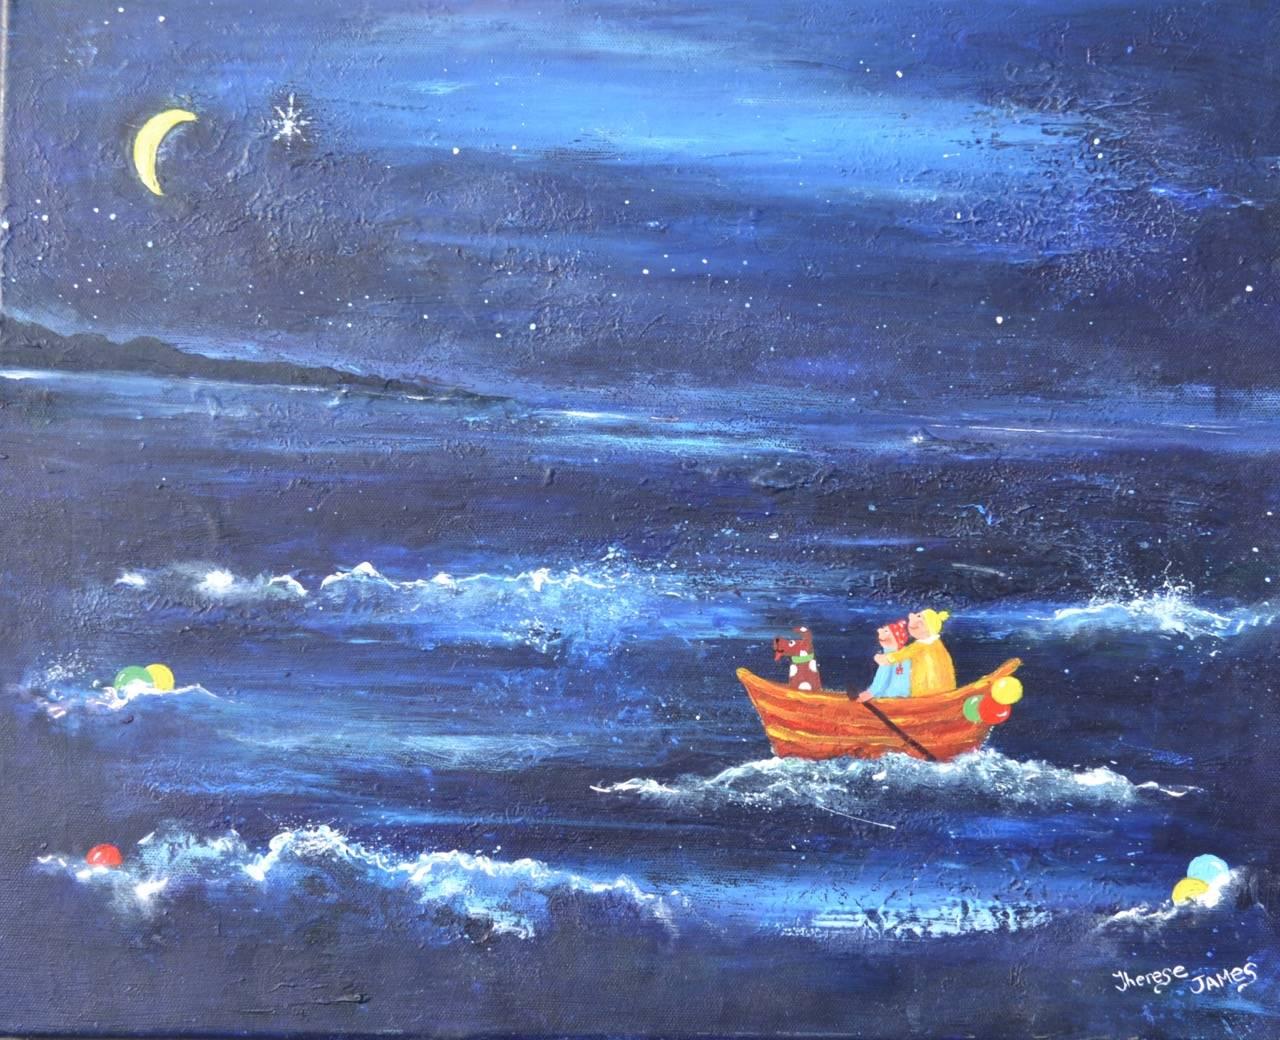 Therese James Figurative Painting - "Wishing On A Star." Naive School Painting